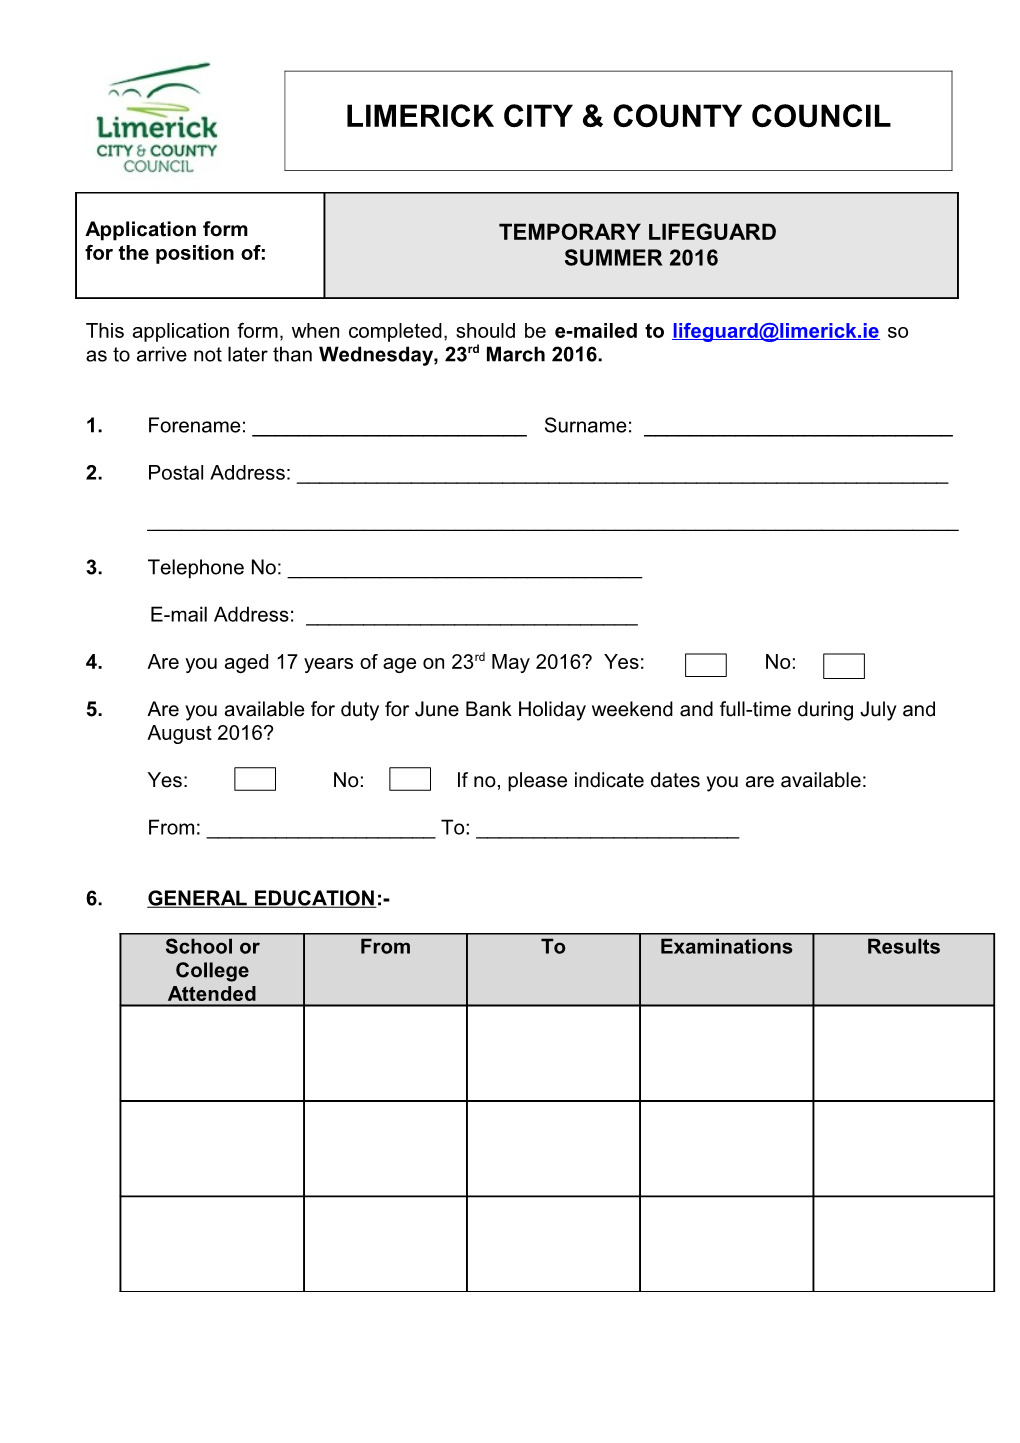 This Application Form, When Completed, Should Be E-Mailed to So As to Arrive Not Later